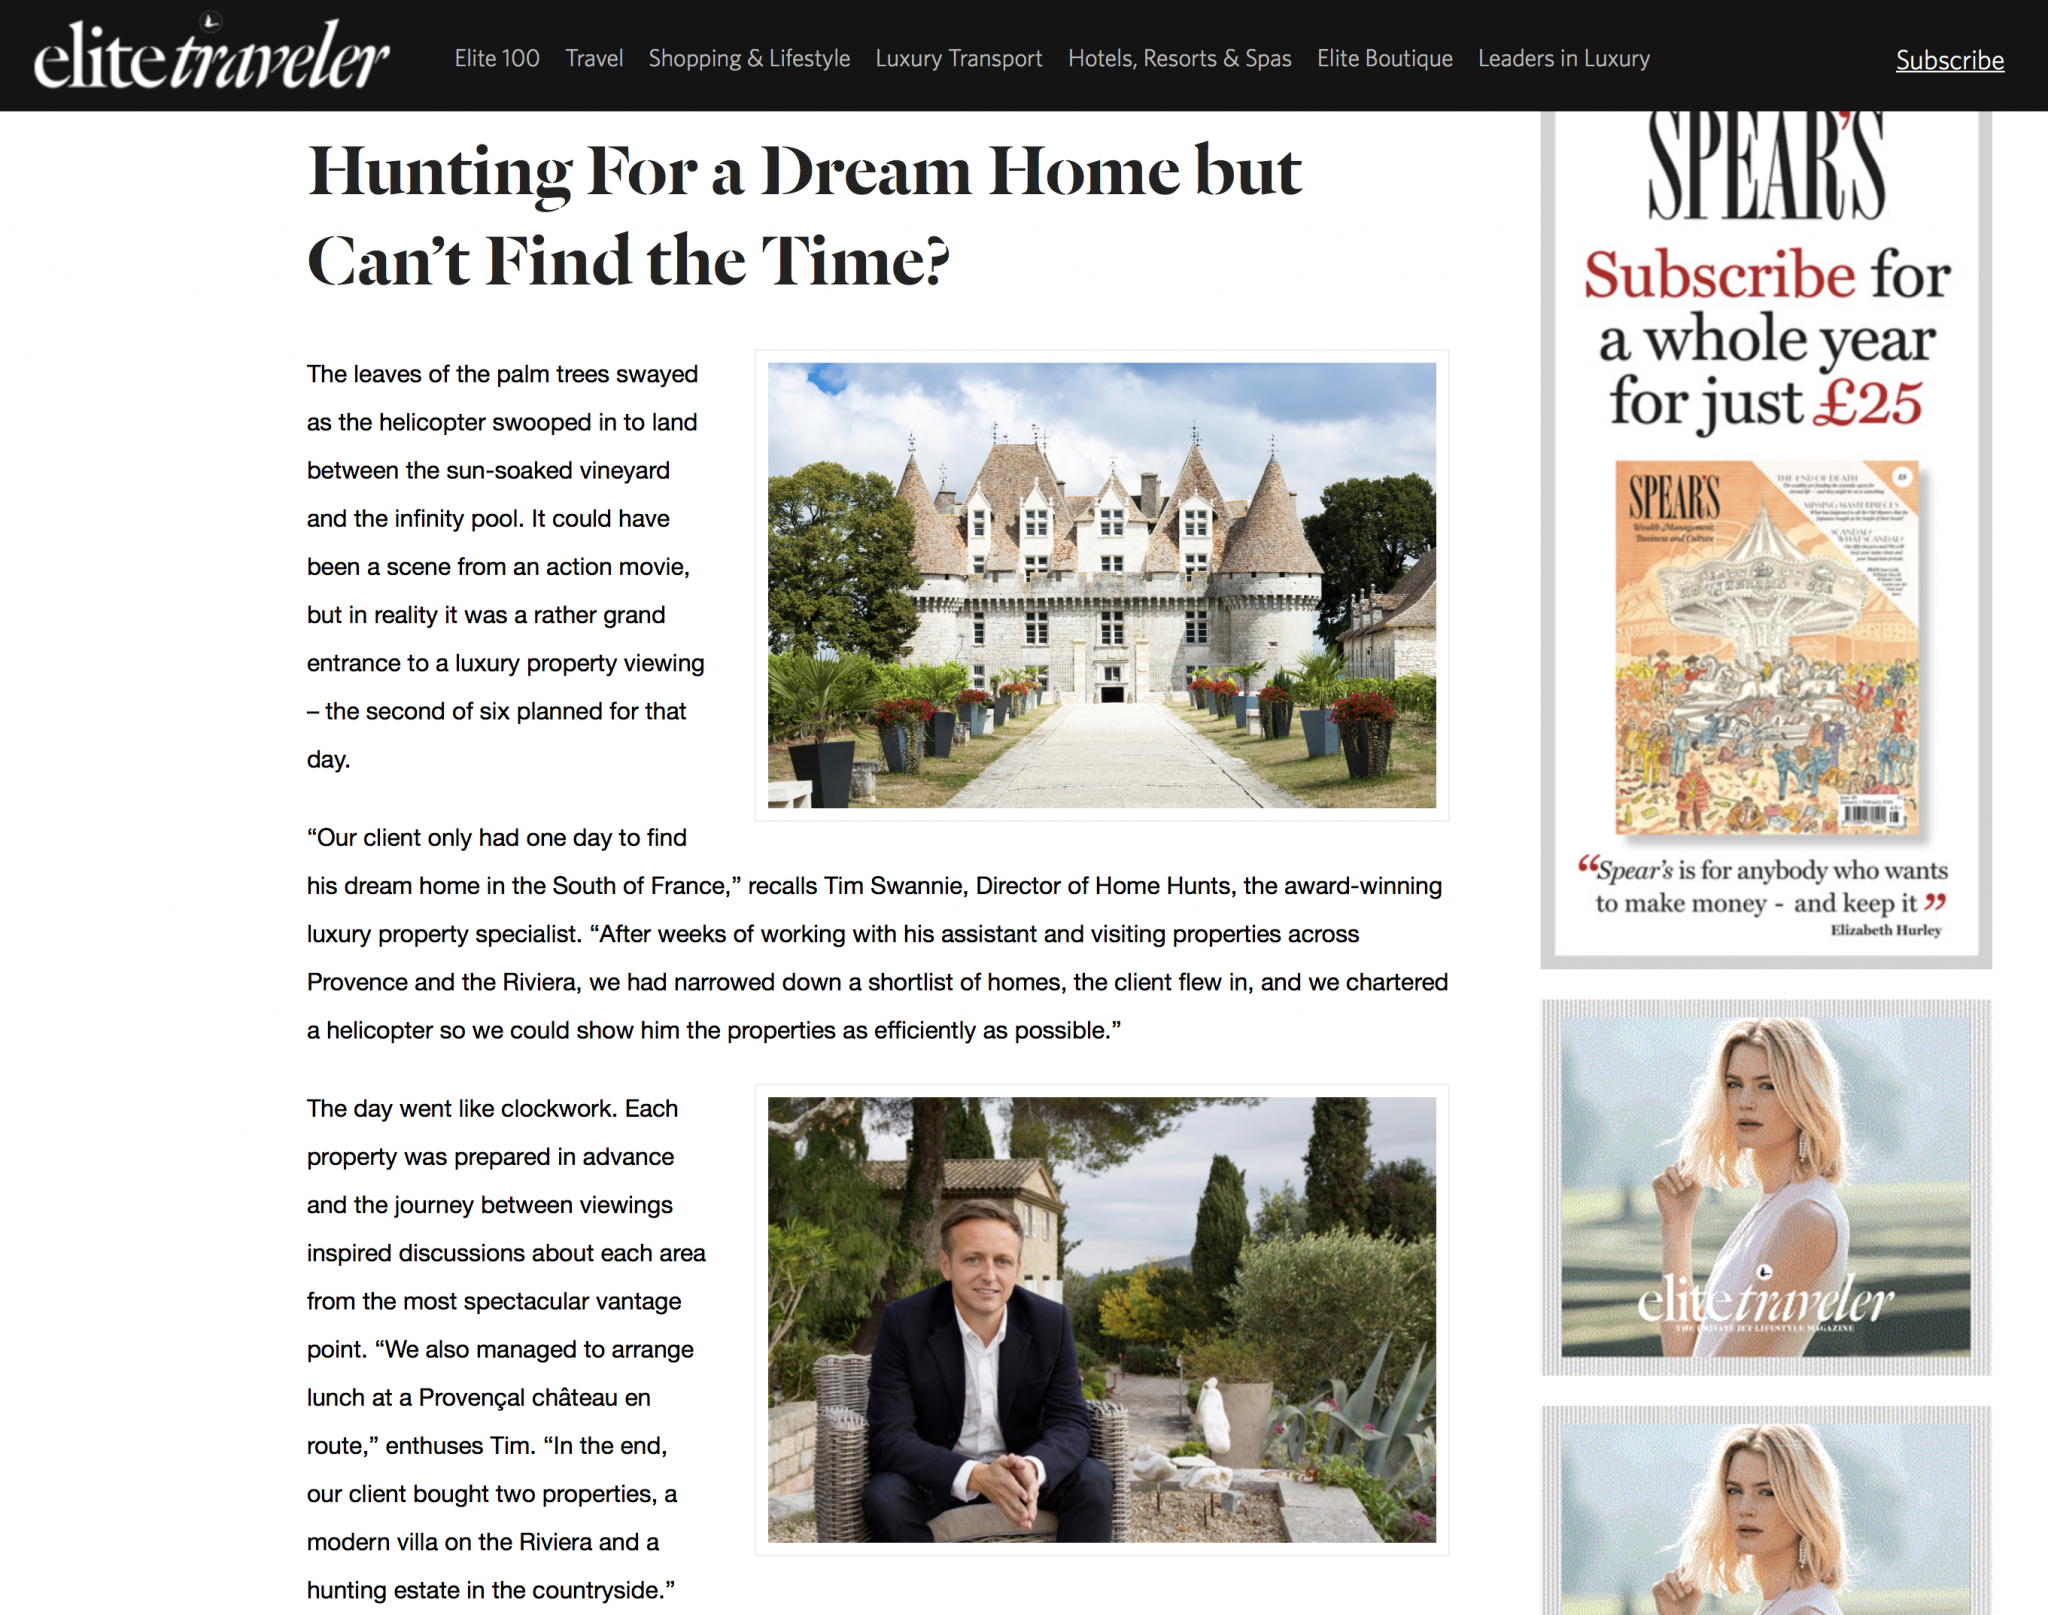 Elite Traveler Magazine – Hunting for a dream home but can’t find the time?